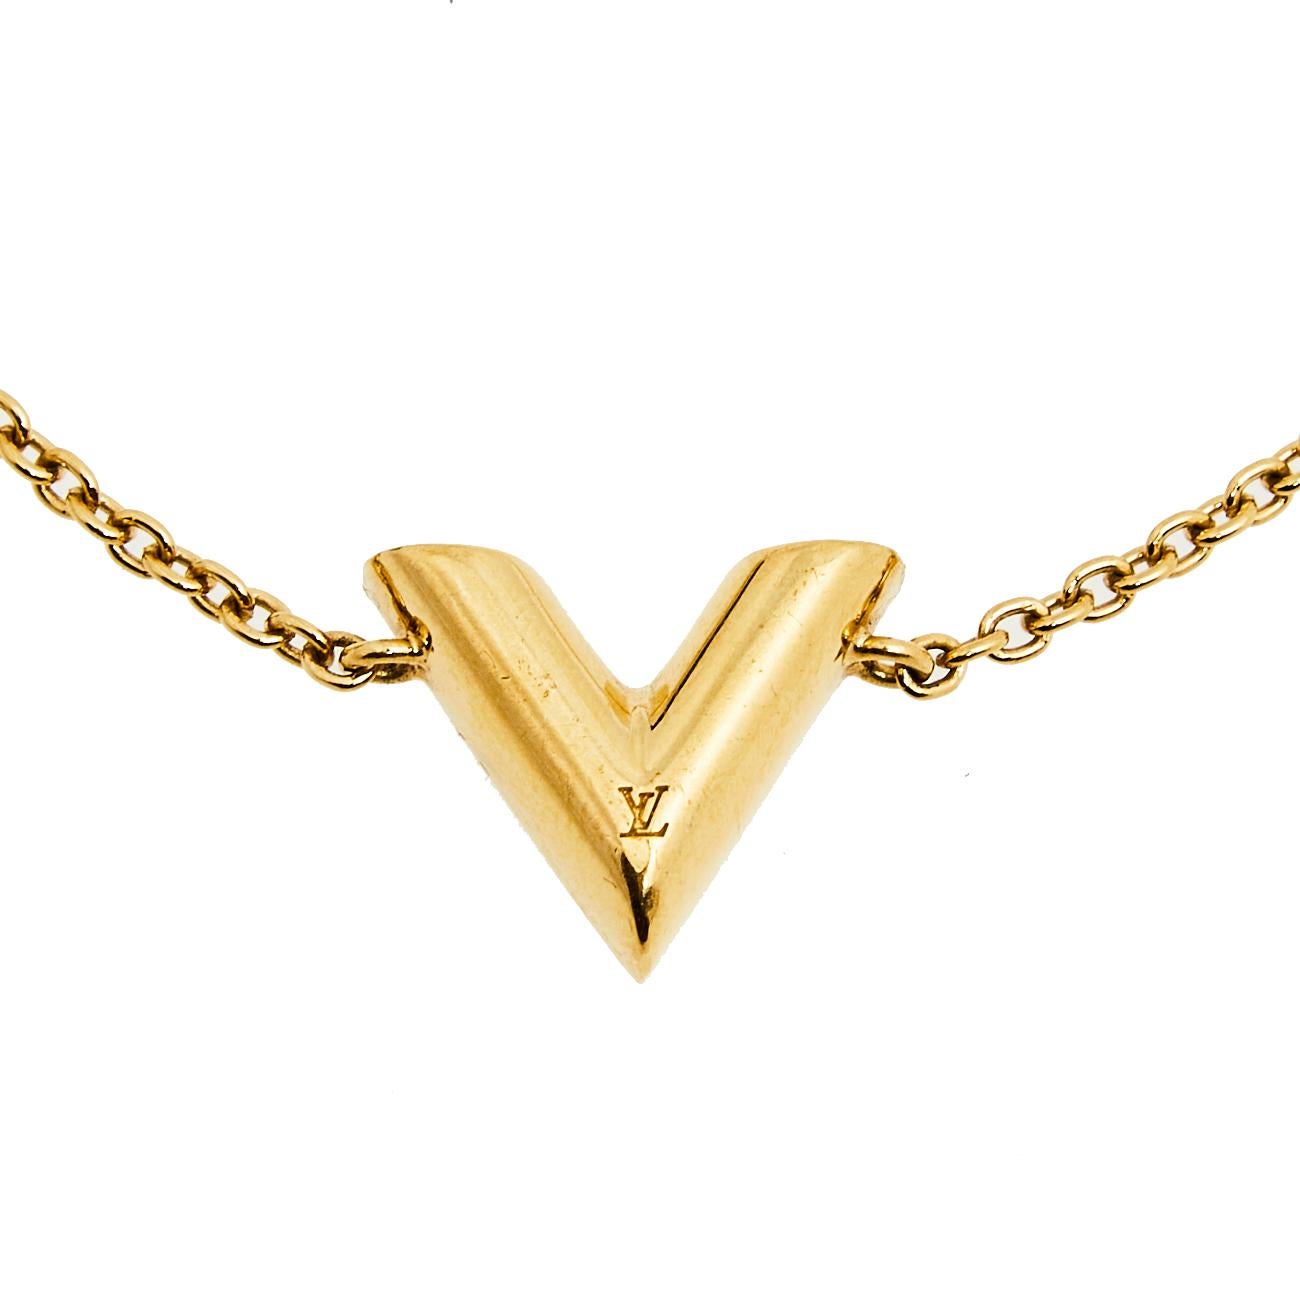 Create an elegant, timeless, and classic addition to both casual and even special events with this beautiful Louis Vuitton Essential V bracelet. Constructed in gold-tone metal, this bracelet features a V charm in the center with LV carving and an